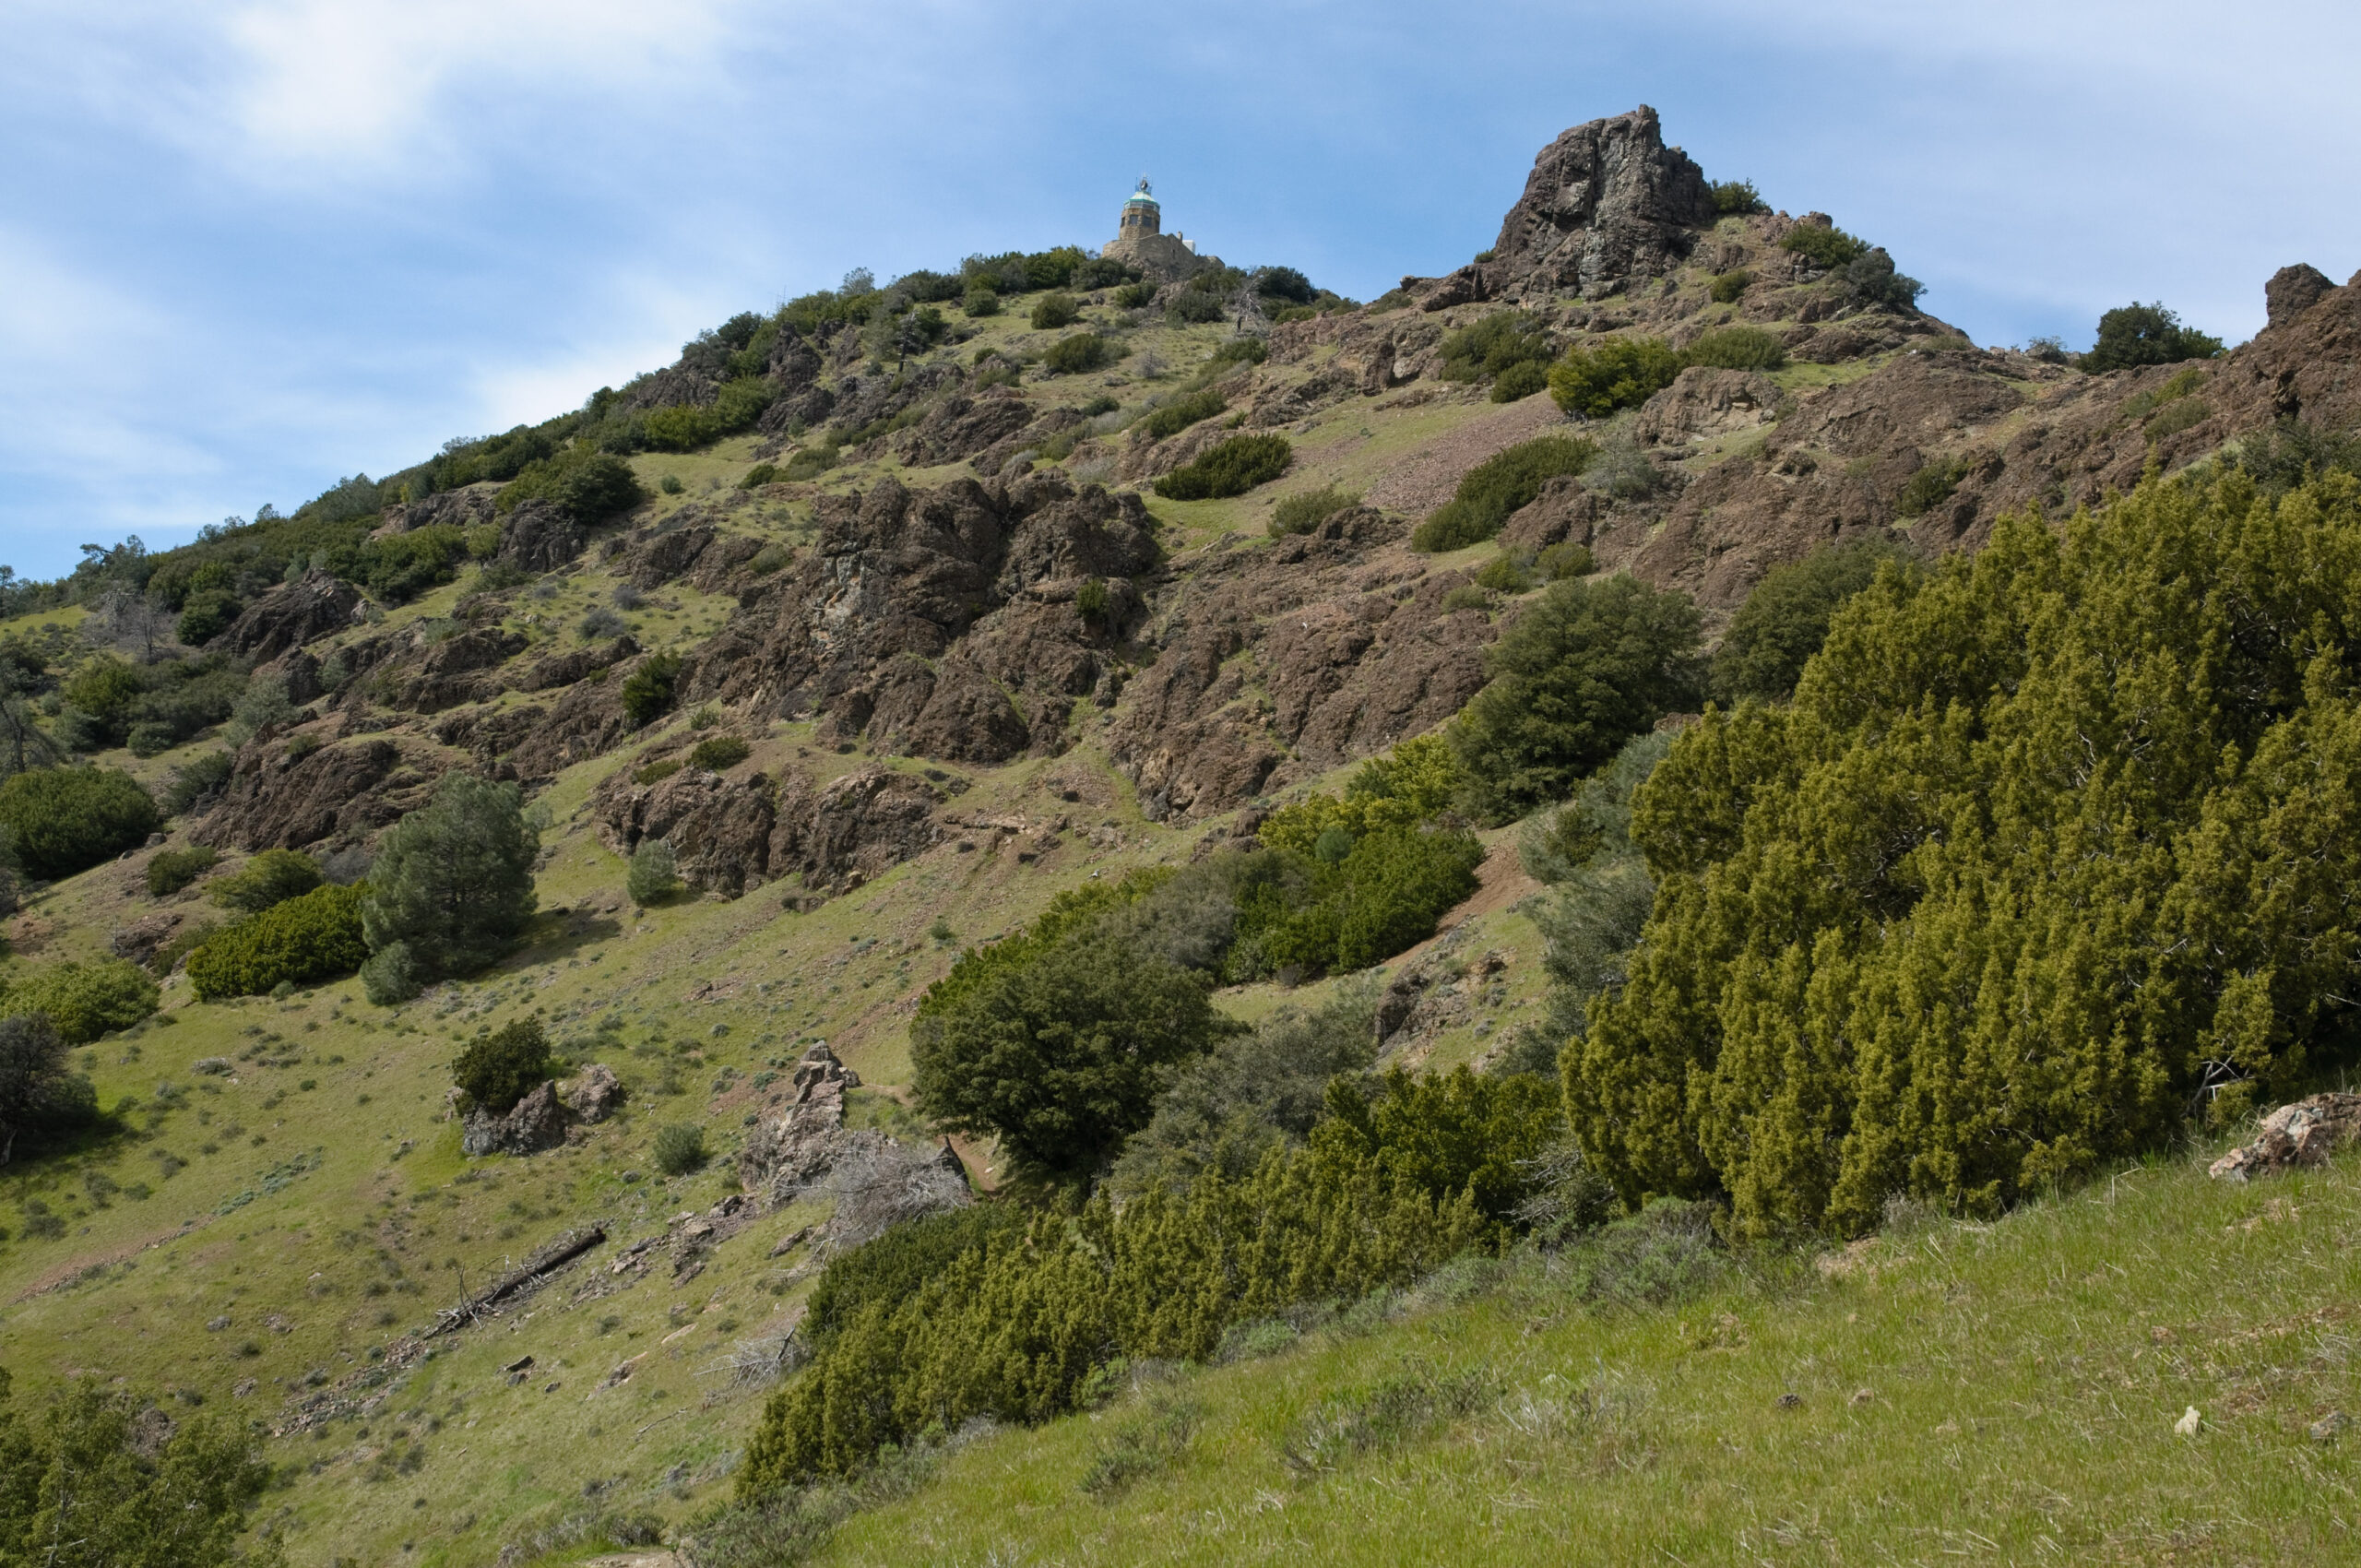 The Mount Diablo Summit Museum and Devils' Pulpit from the Devil's Elbow Trail cover in verdant green foliage. Photo by Scott Hein.